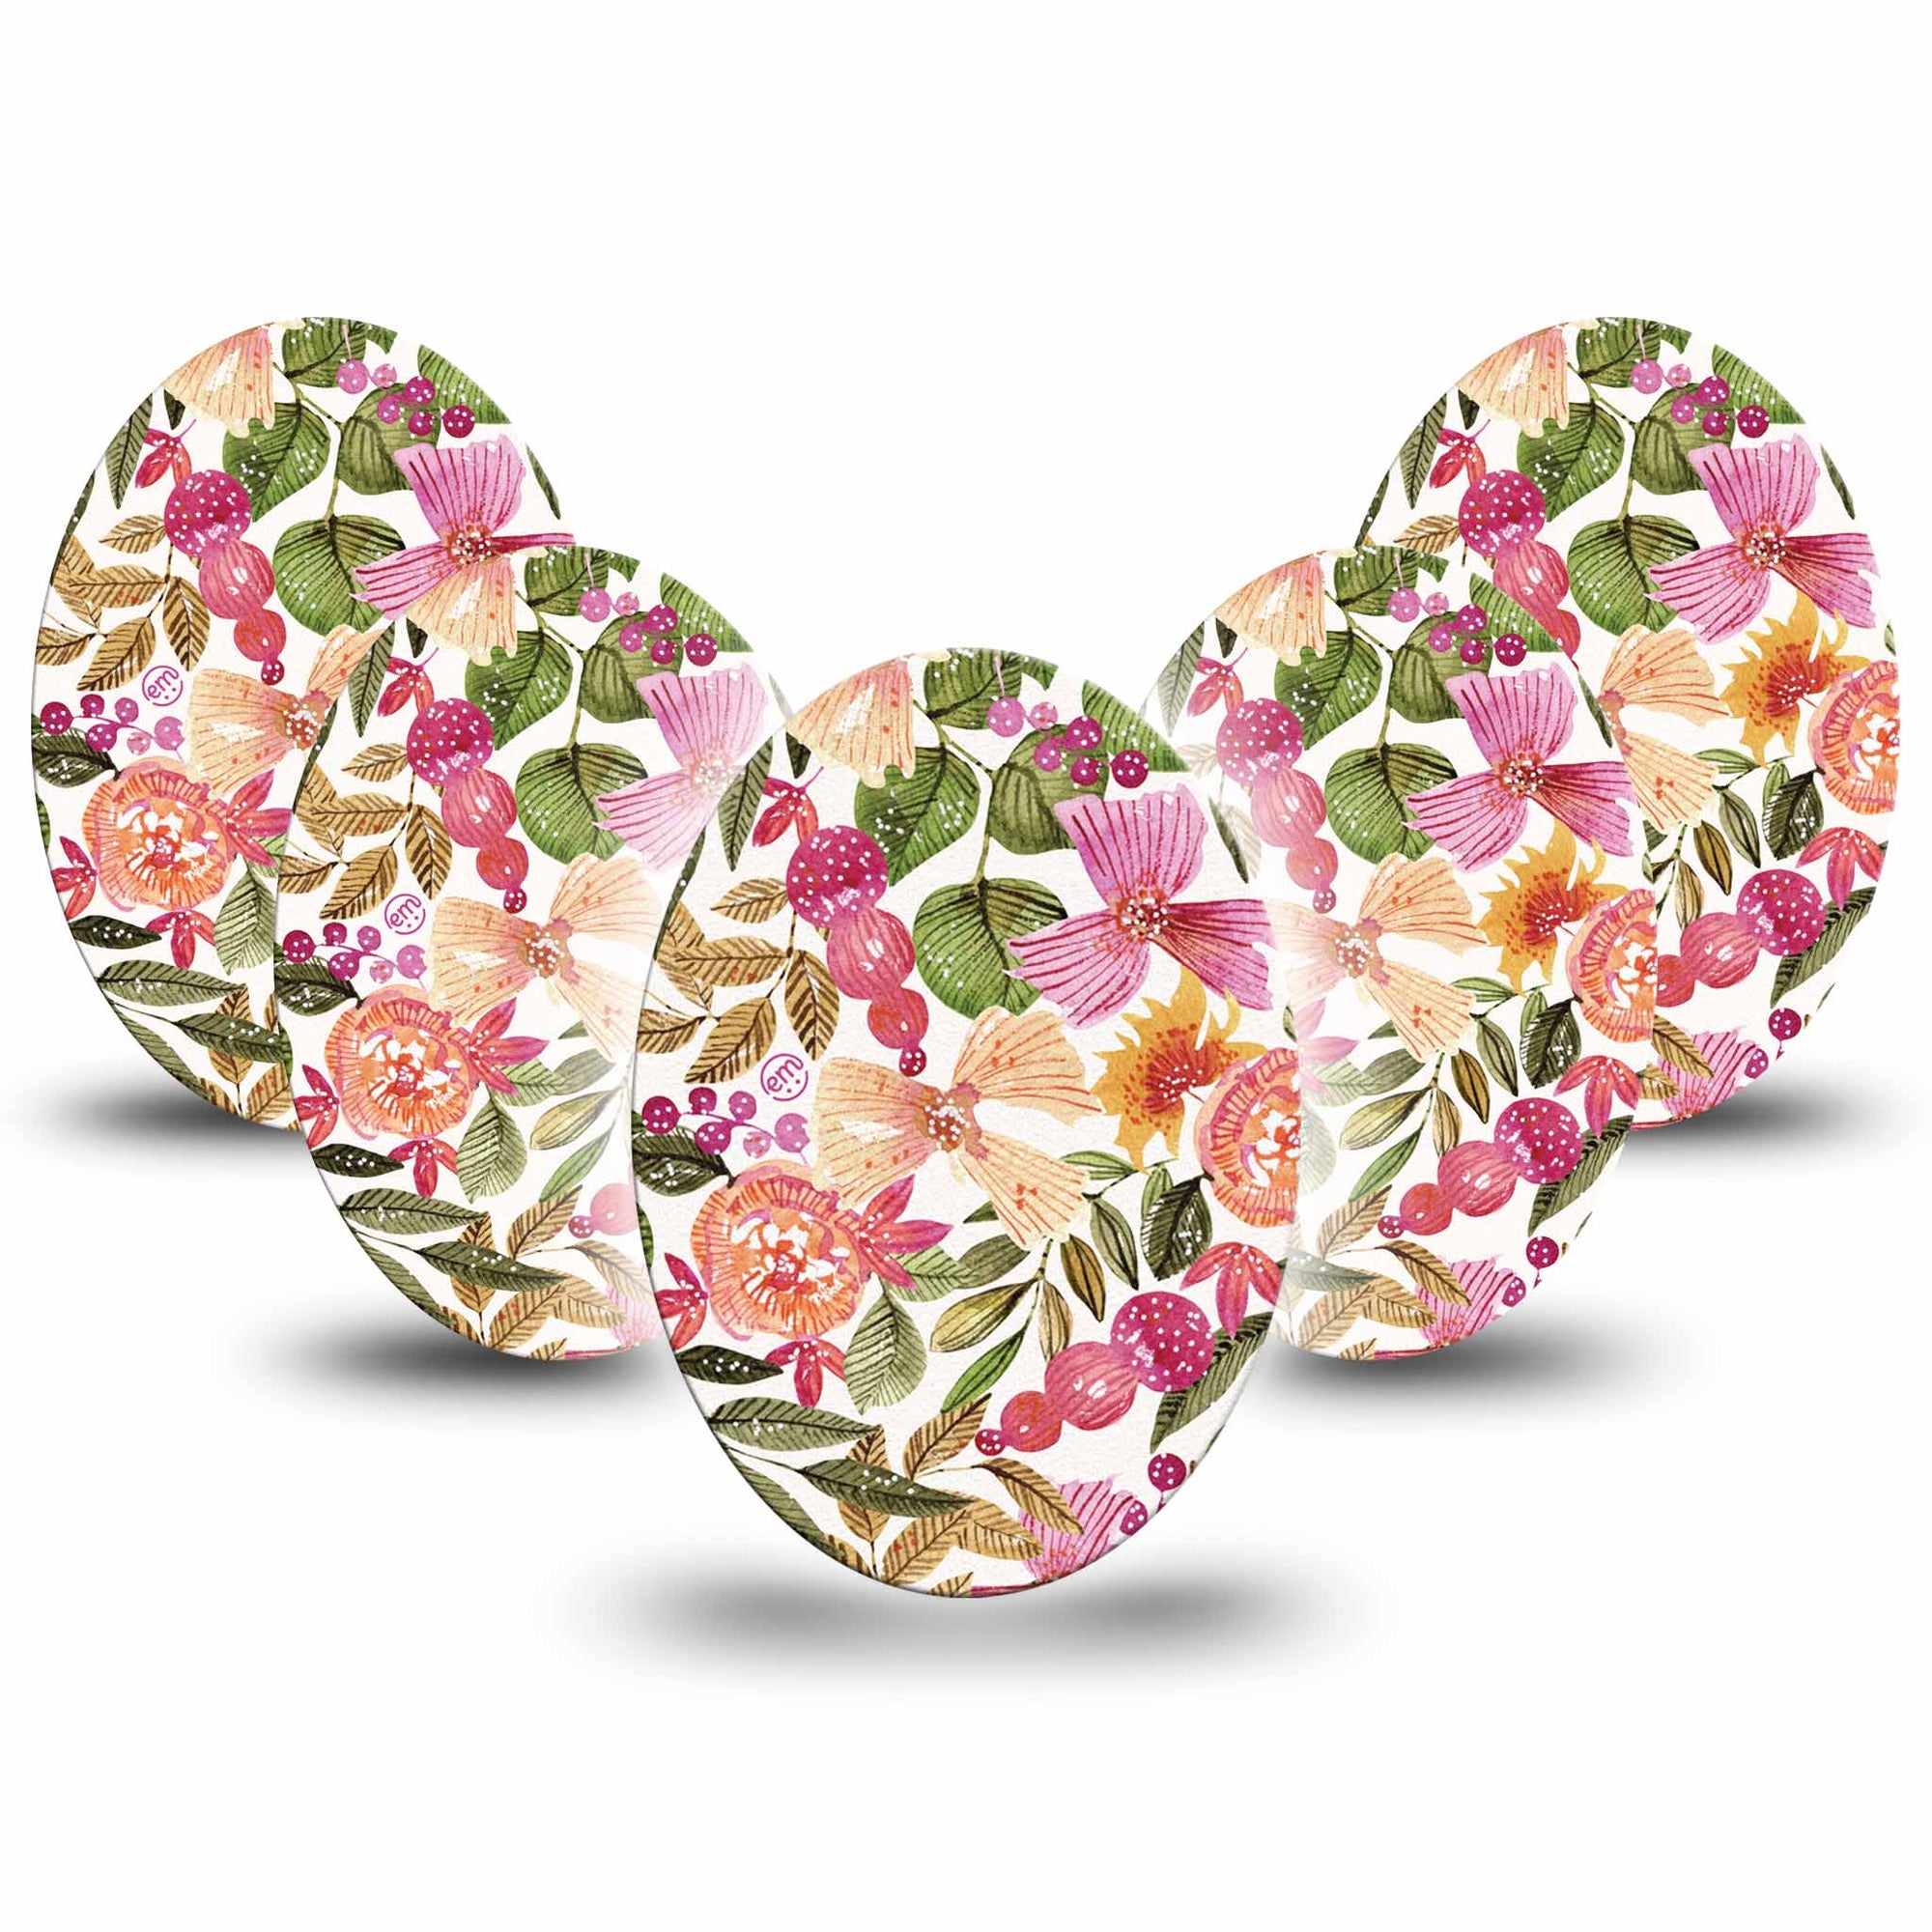 Medtronic Enlite / Guardian Spring Bouquet Universal Oval Tape, 5-Pack, Eastertime Floral Artwork Inspired, CGM Patch Design